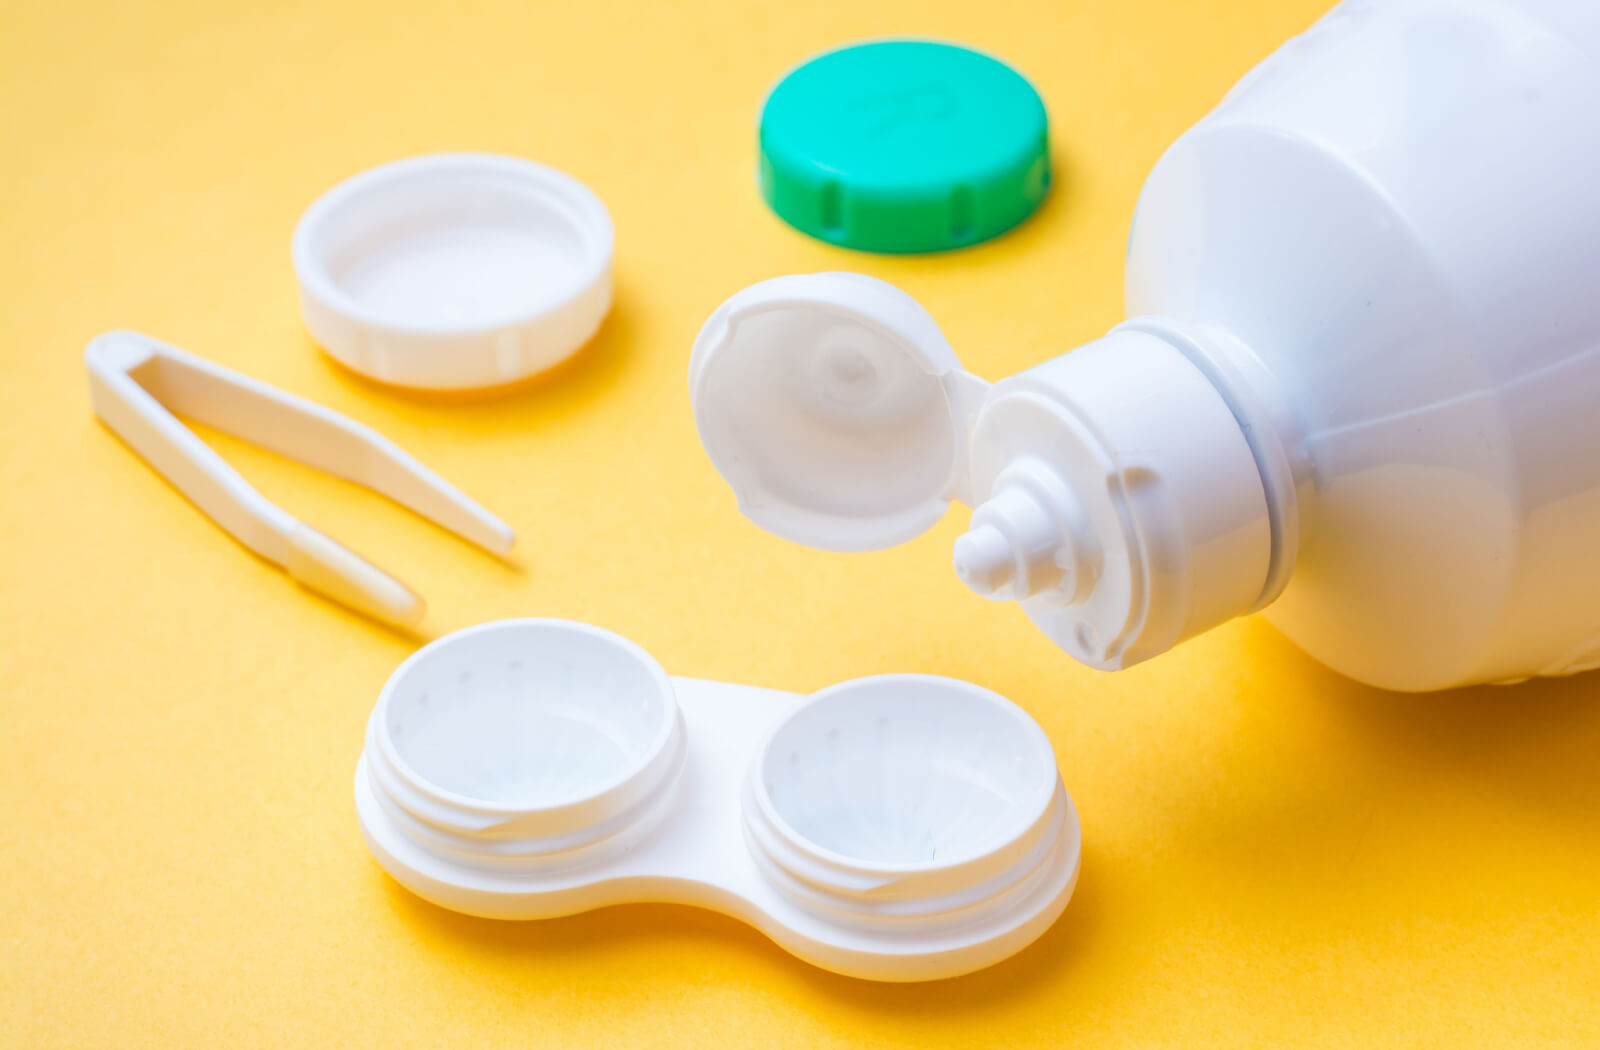 Contact lens cleaning fluid is poured into an open container for storing lenses.